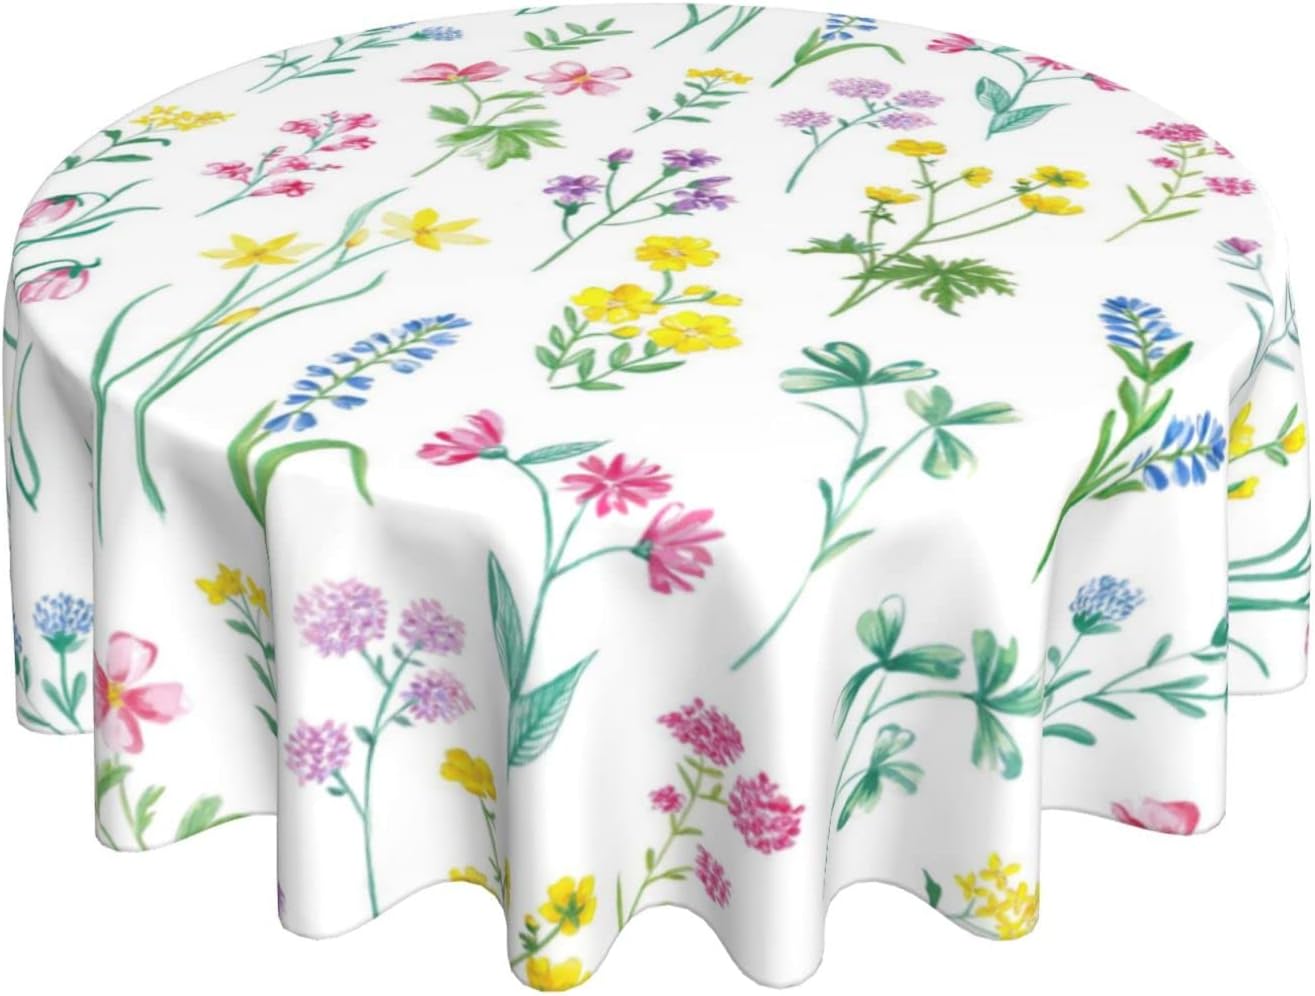 aportt Spring Flowers Tablecloth Round Table Cover Washable Stain and Wrinkle Resistant Water-Proof Table Cloth 60 Inches